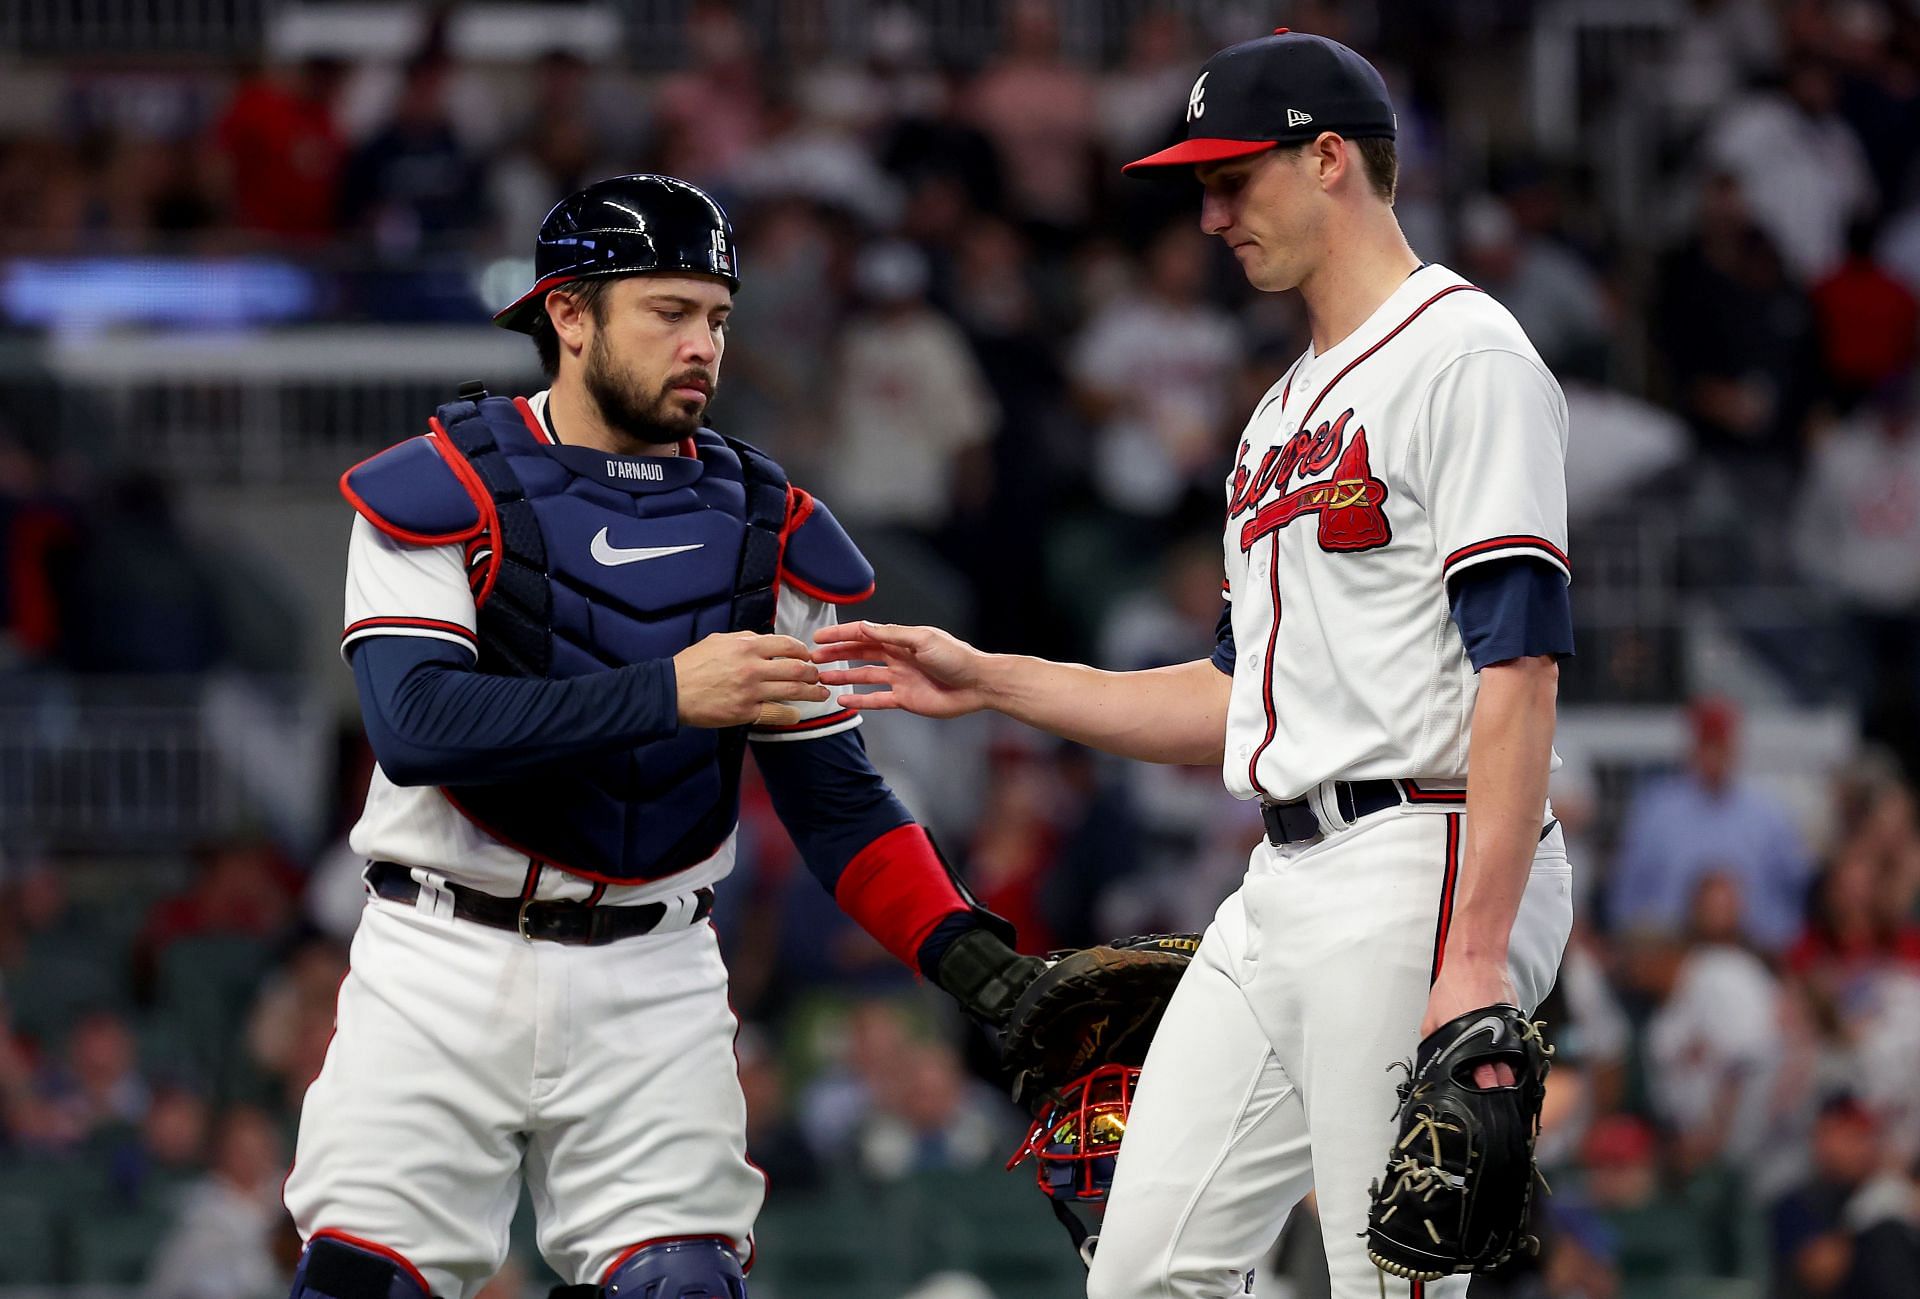 Atlanta Braves' Kyle Wright, winless in 2021, becomes MLB's first